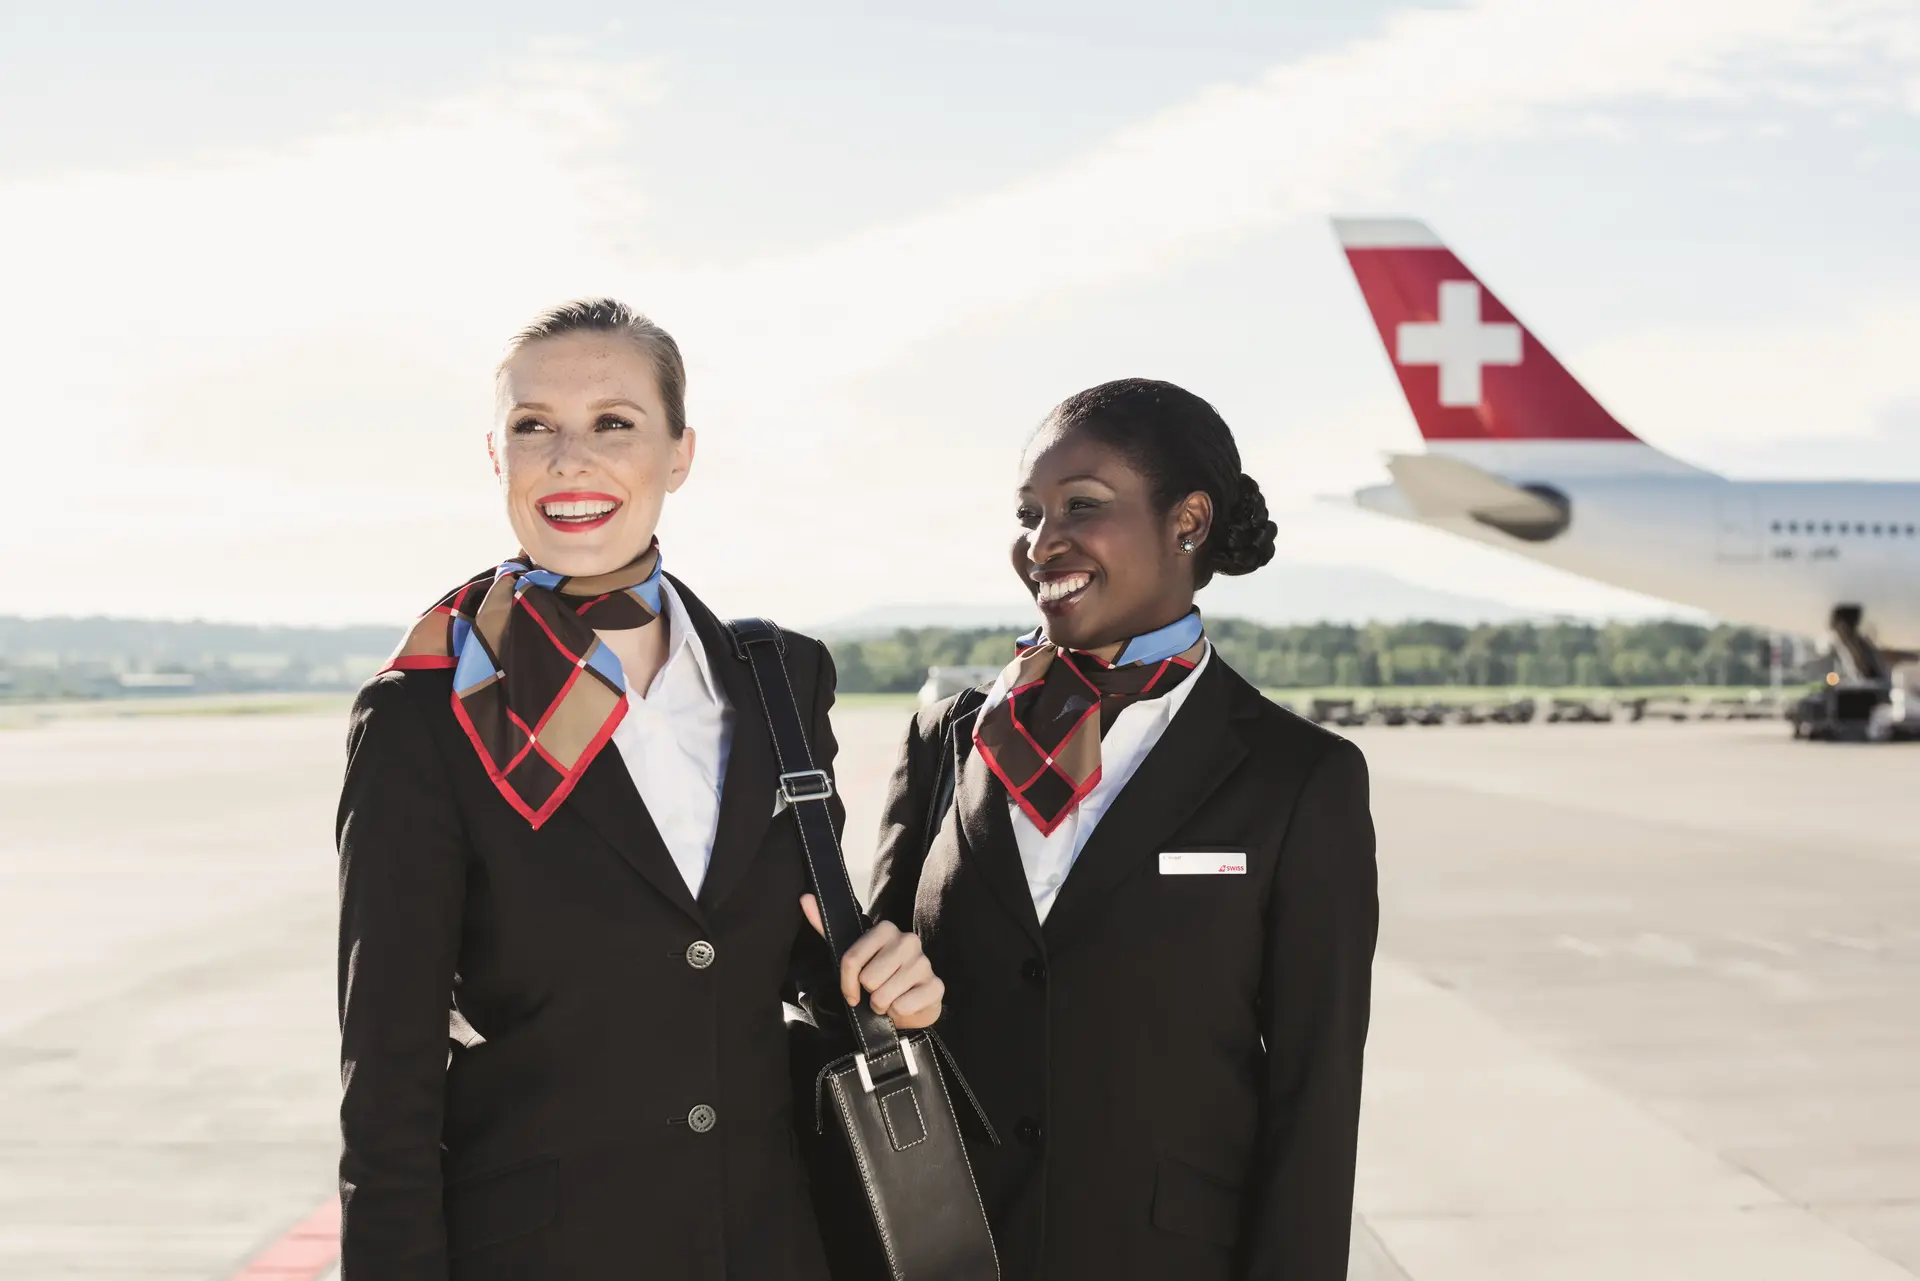 Airline review Service - SWISS - 5